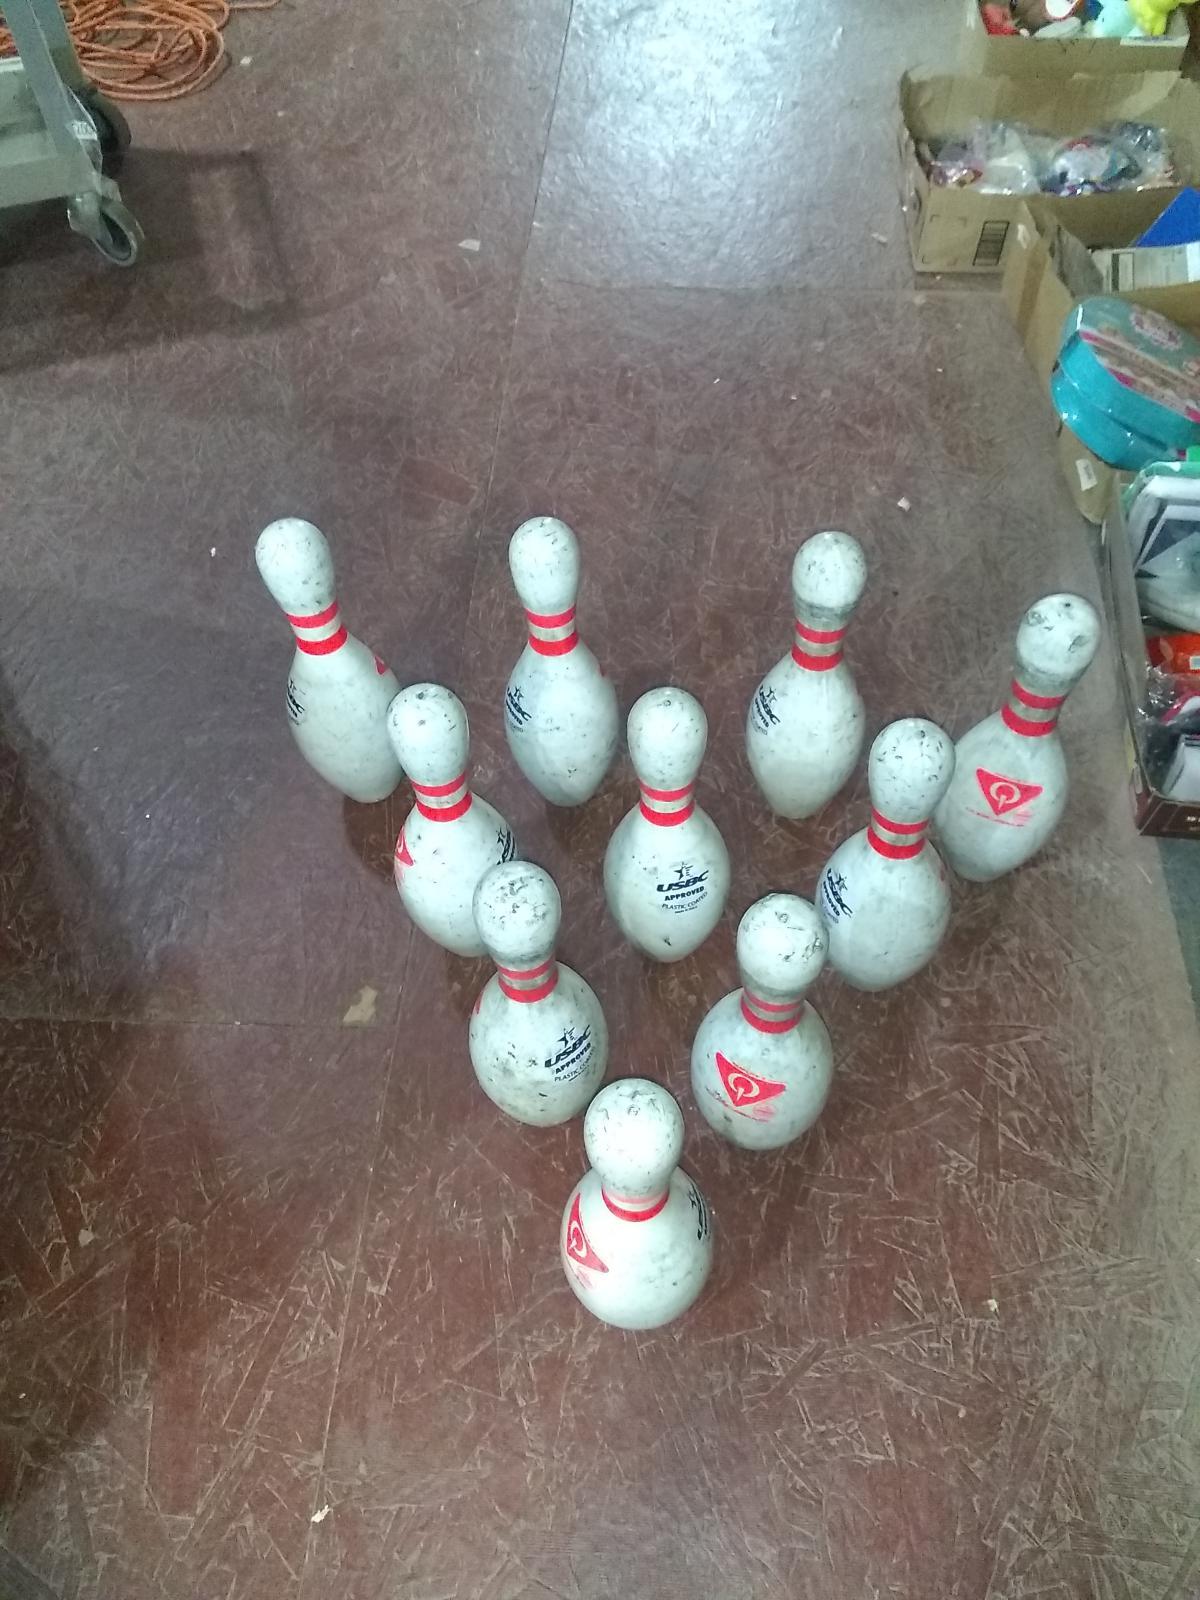 Twister-USBC Approved Bowling Pins